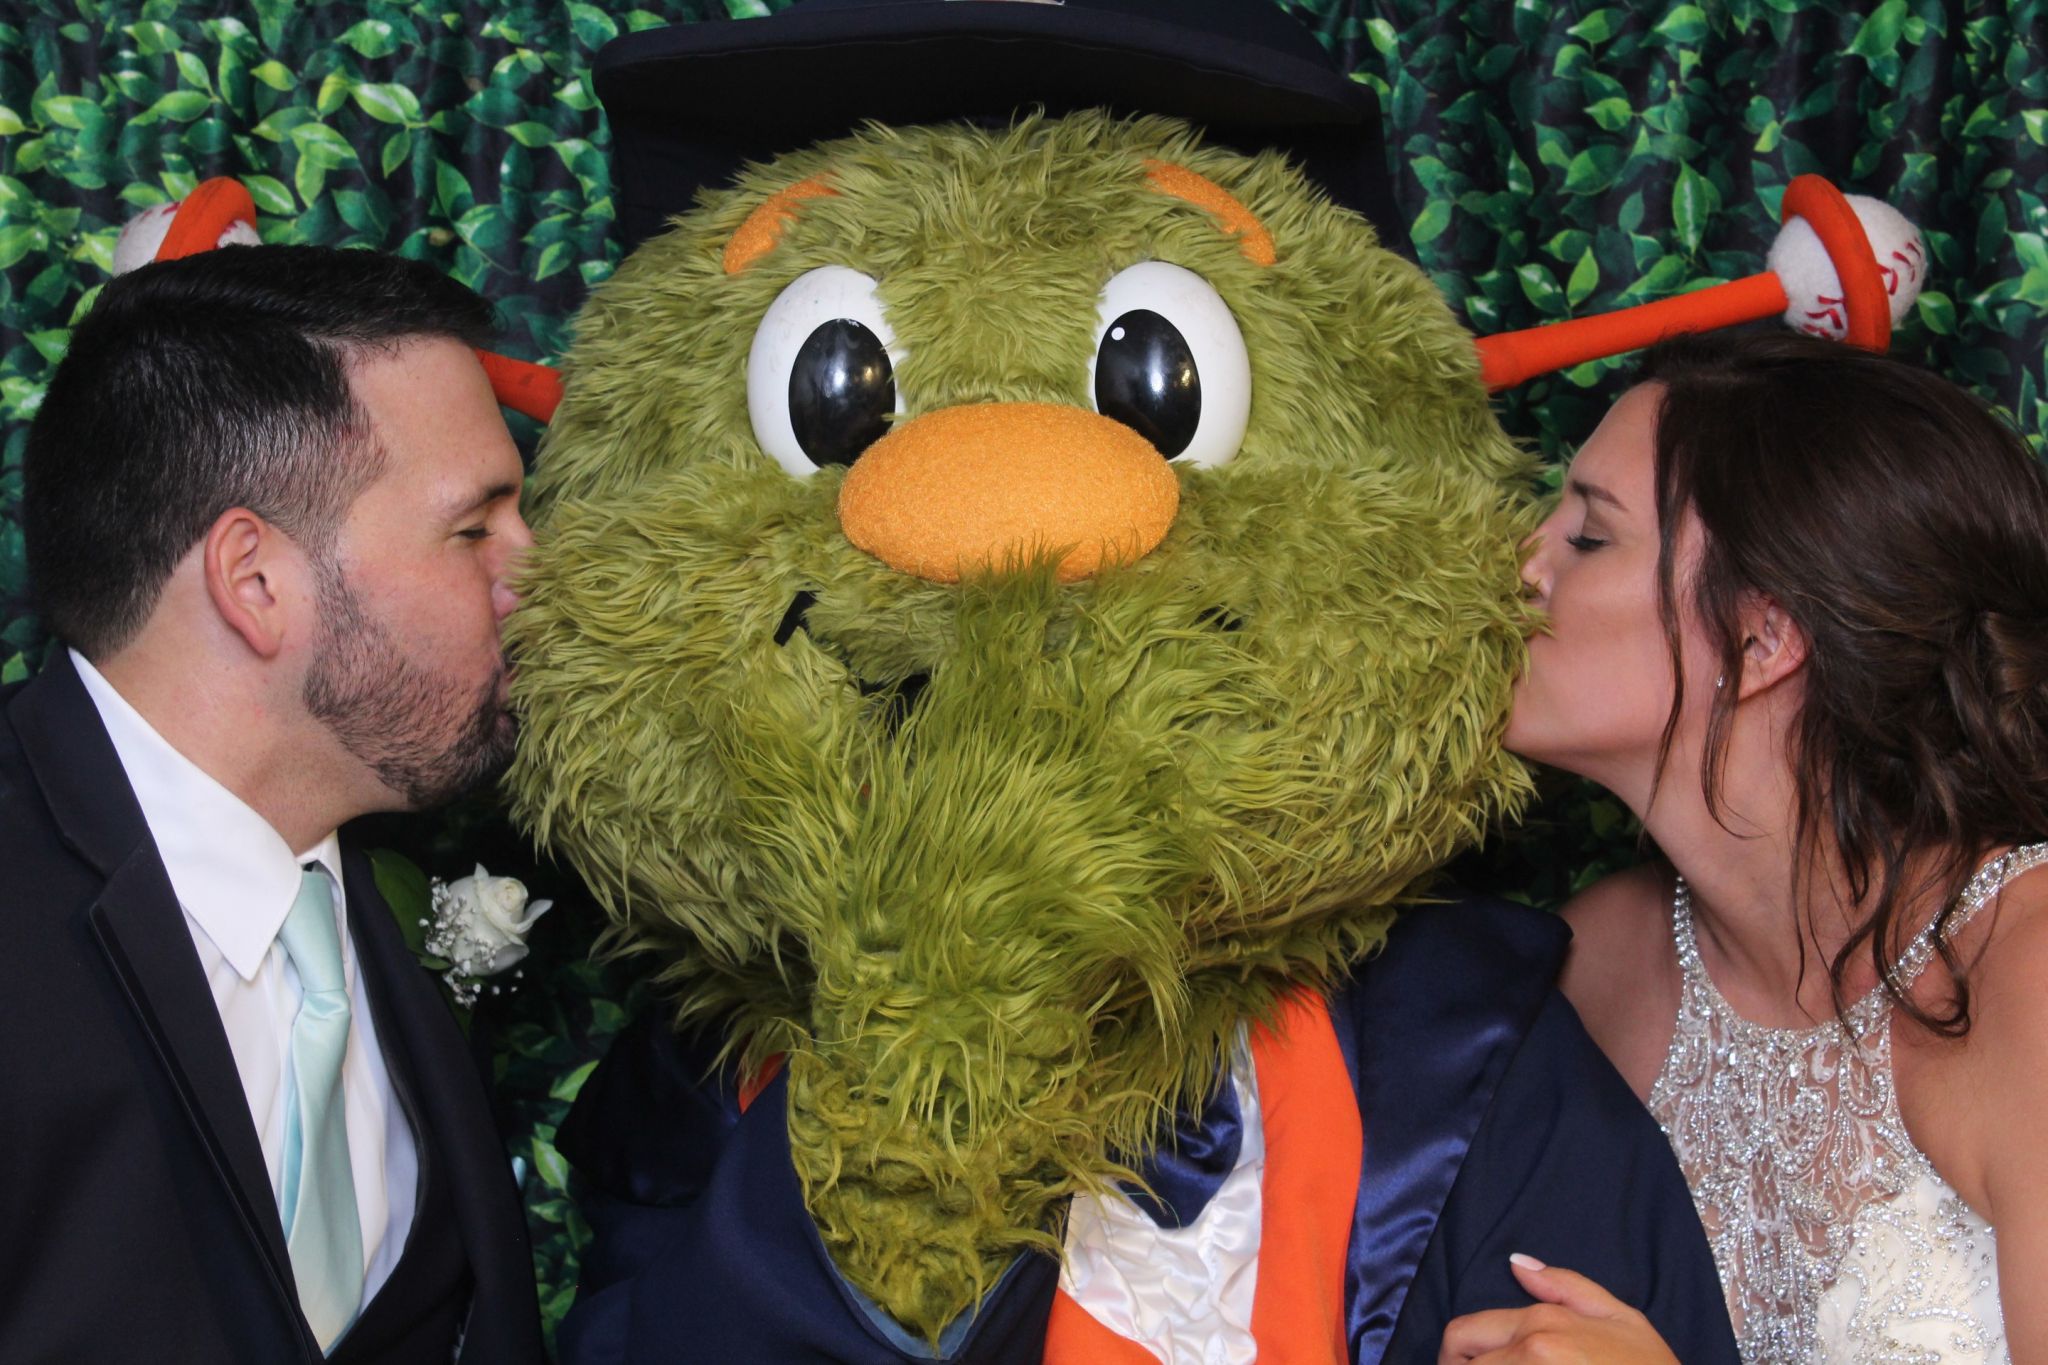 Houston Astros mascot Orbit attends wedding, one-ups bride and groom's ring  game